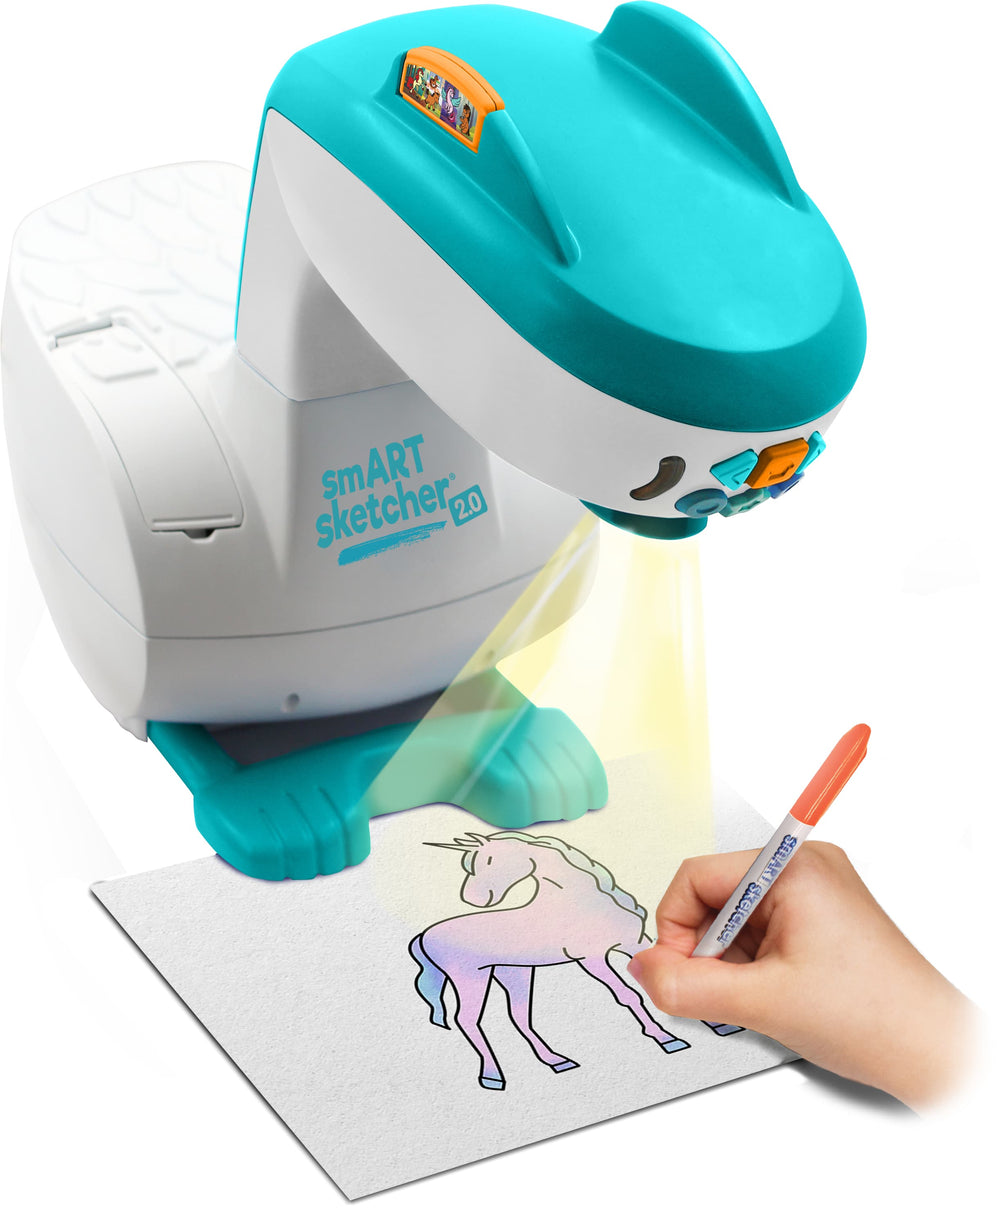 ad Learn to draw with smART Sketcher Projector! #Flycatchertoys #sm